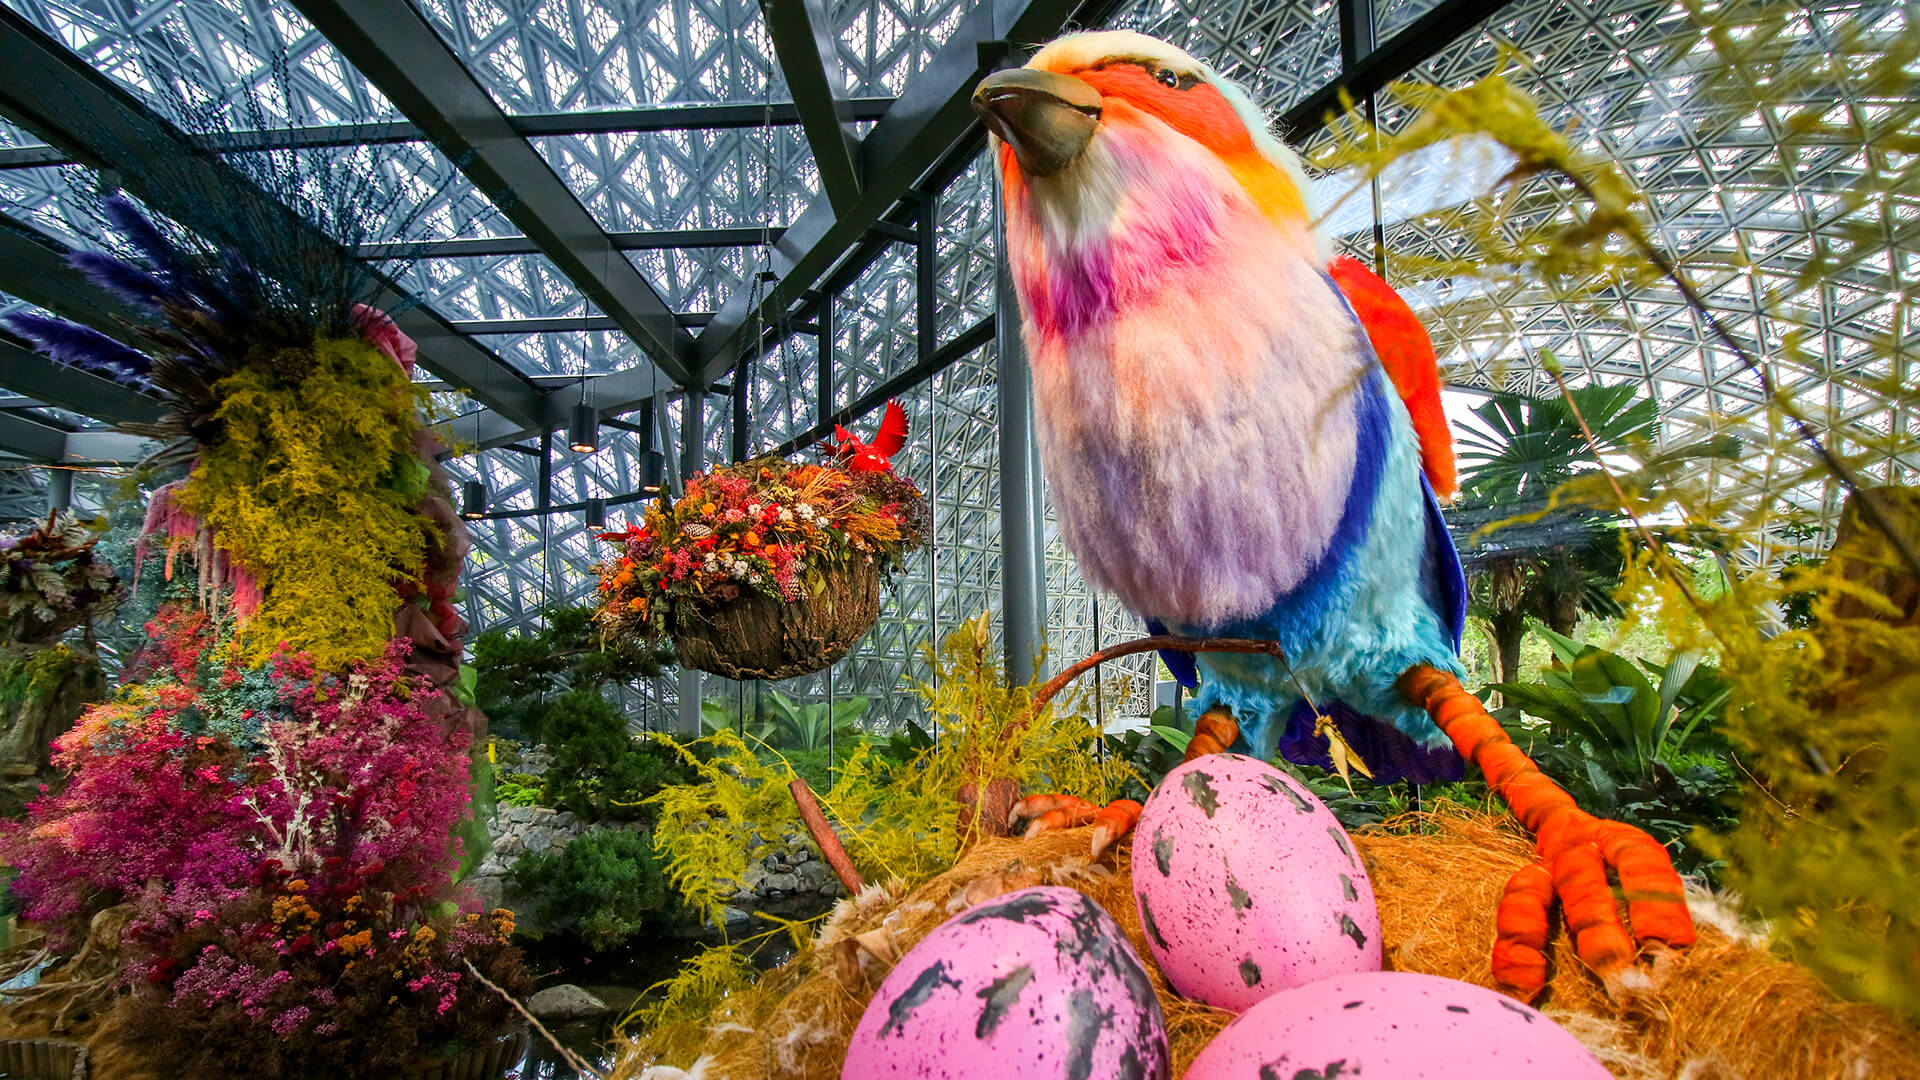 https://www.gardensbythebay.com.sg/content/dam/gbb-2021/image/things-to-do/attractions/floral-fantasy/gallery/floral-fantasy-03.jpg